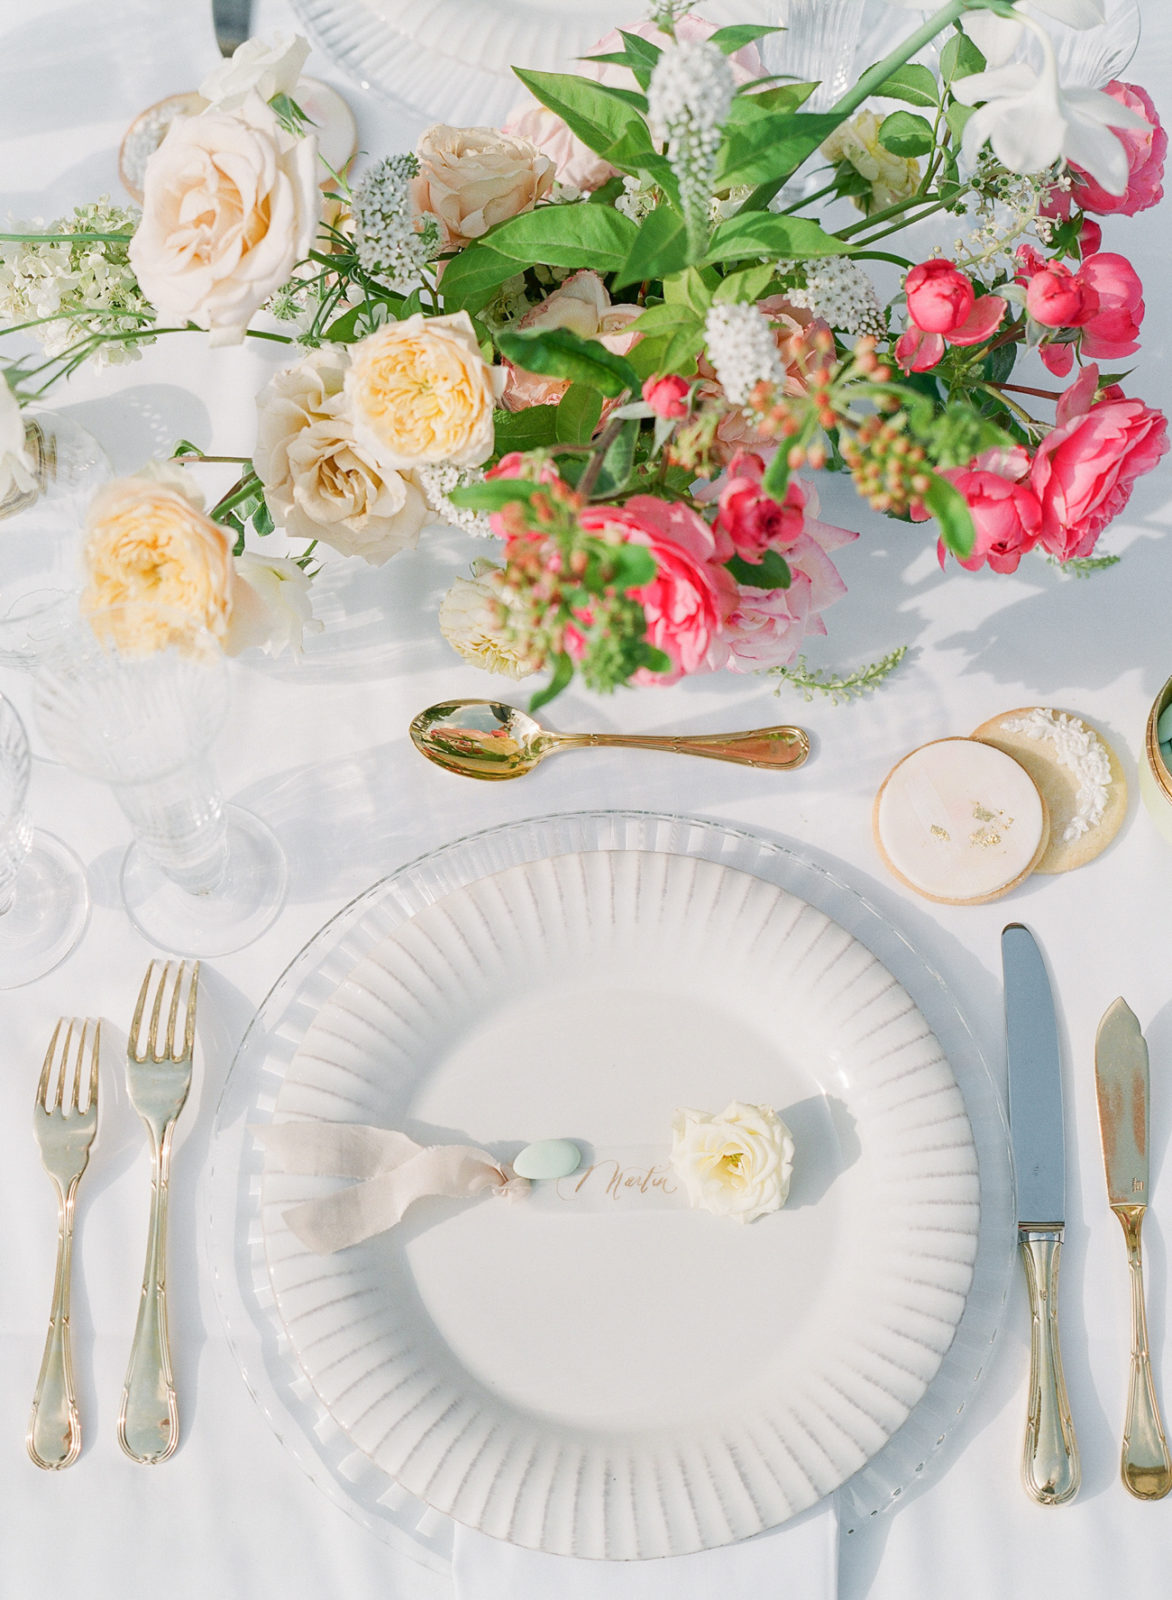 Musee Rodin Wedding Photographer | Paris Garden Wedding Photography | Paris Film Photographer | France Wedding Photography | Molly Carr Photography | Paris Outdoor Wedding | Wedding Reception Table with Pink Flowers and Gold Flatware